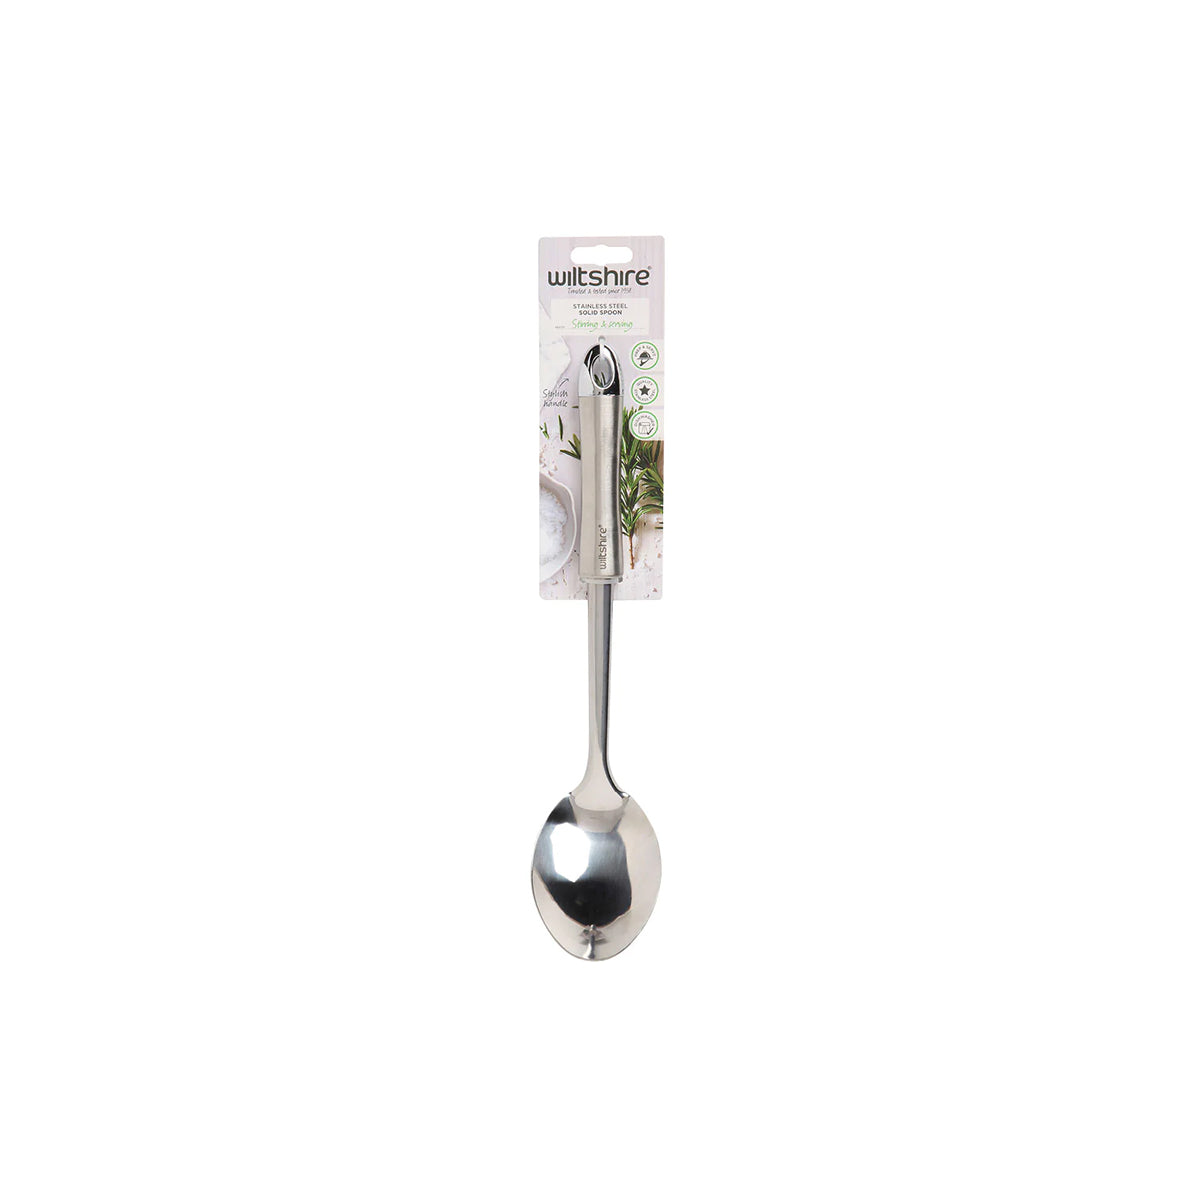 WLT43750 Wiltshire Industrial Solid Spoon Stainless Steel Tomkin Australia Hospitality Supplies